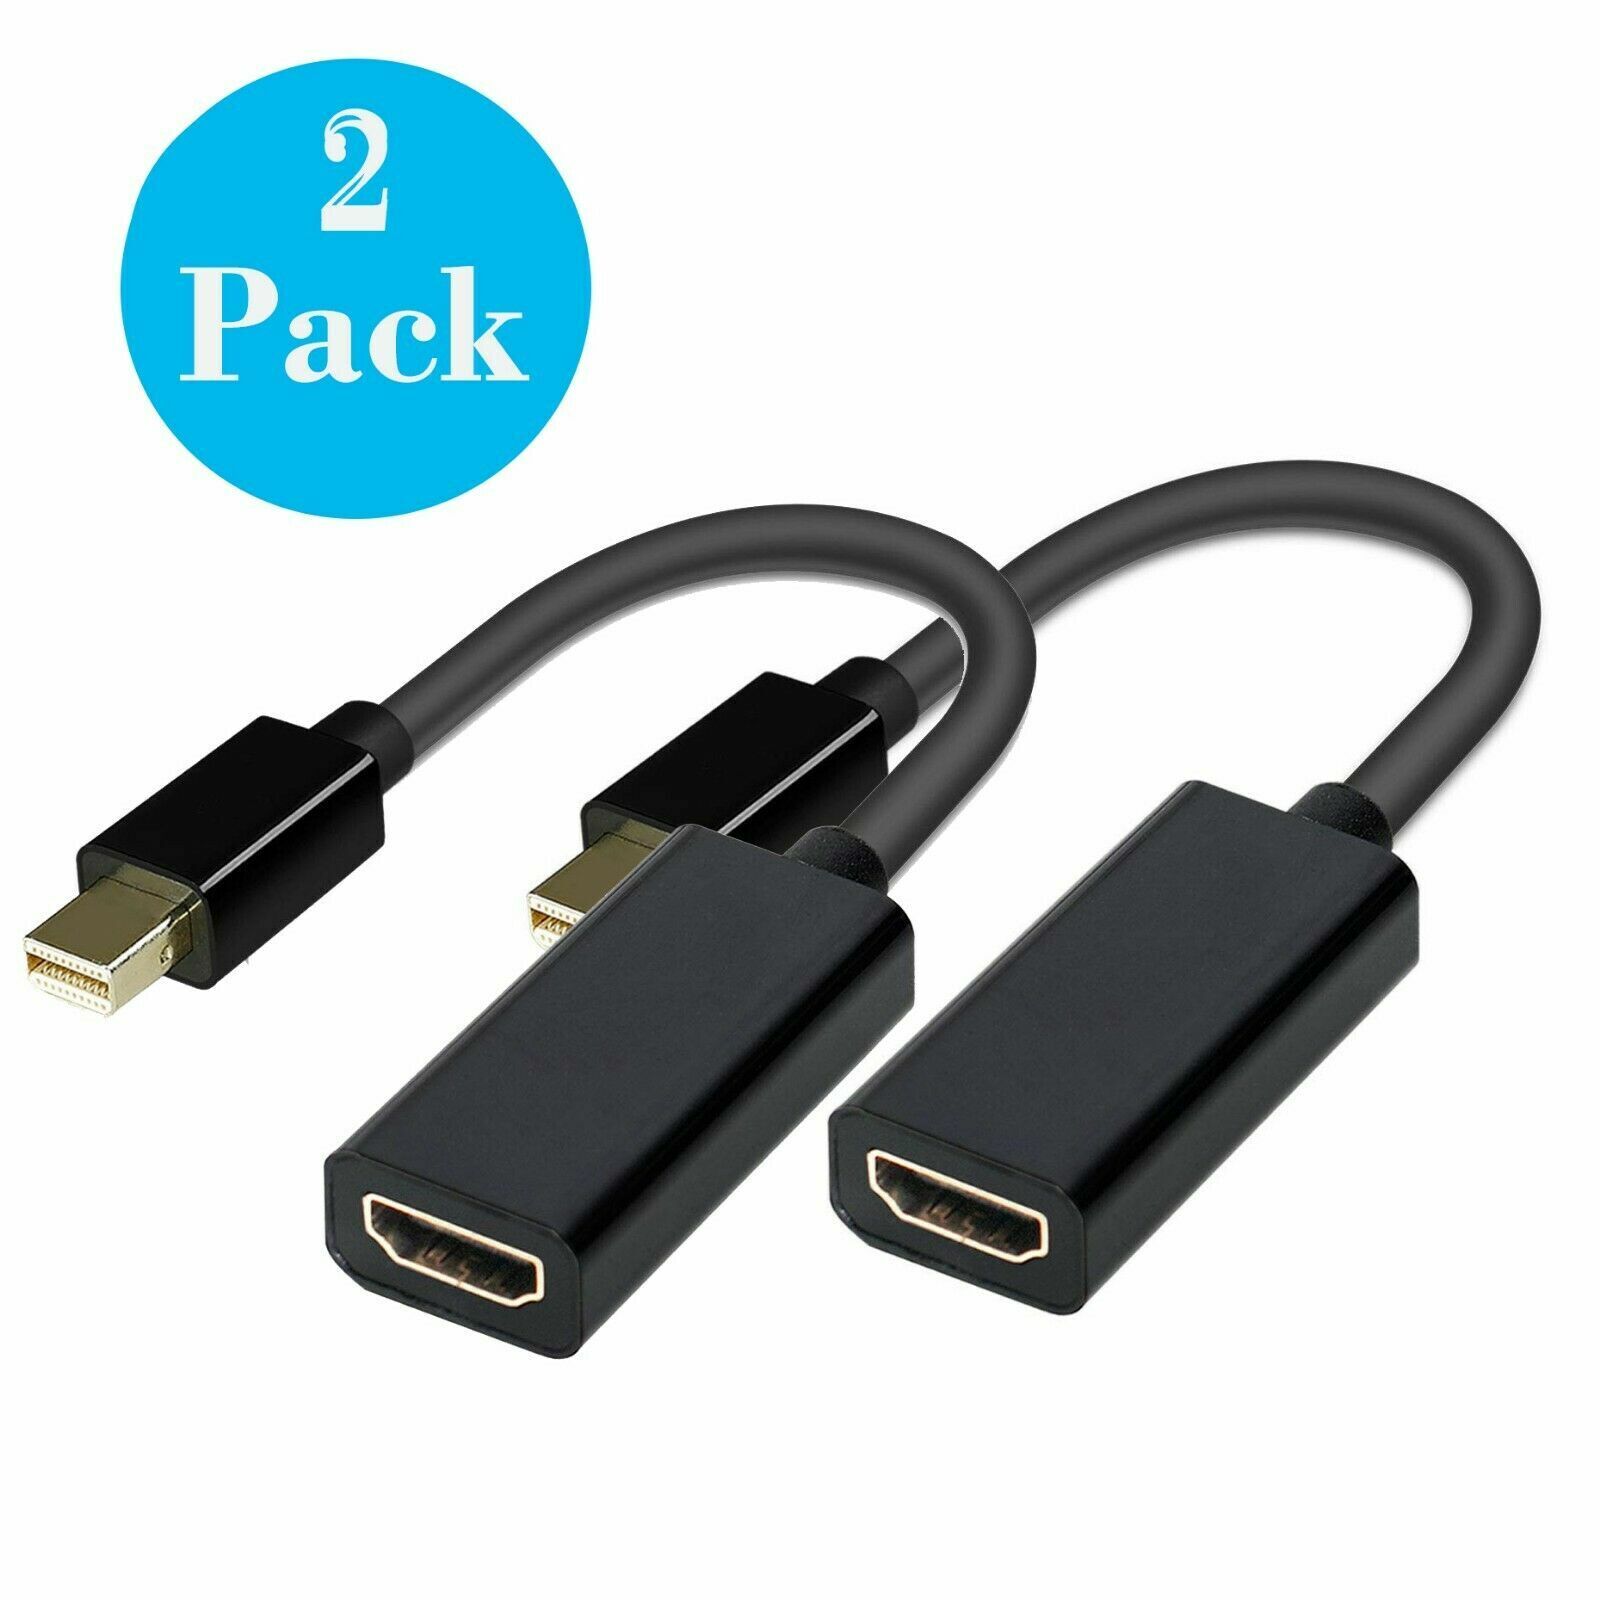 2x Thunderbolt Mini Display Port To HDMI Adapter for Apple Air Pro MacBook Black Unbranded/Generic Does Not Apply